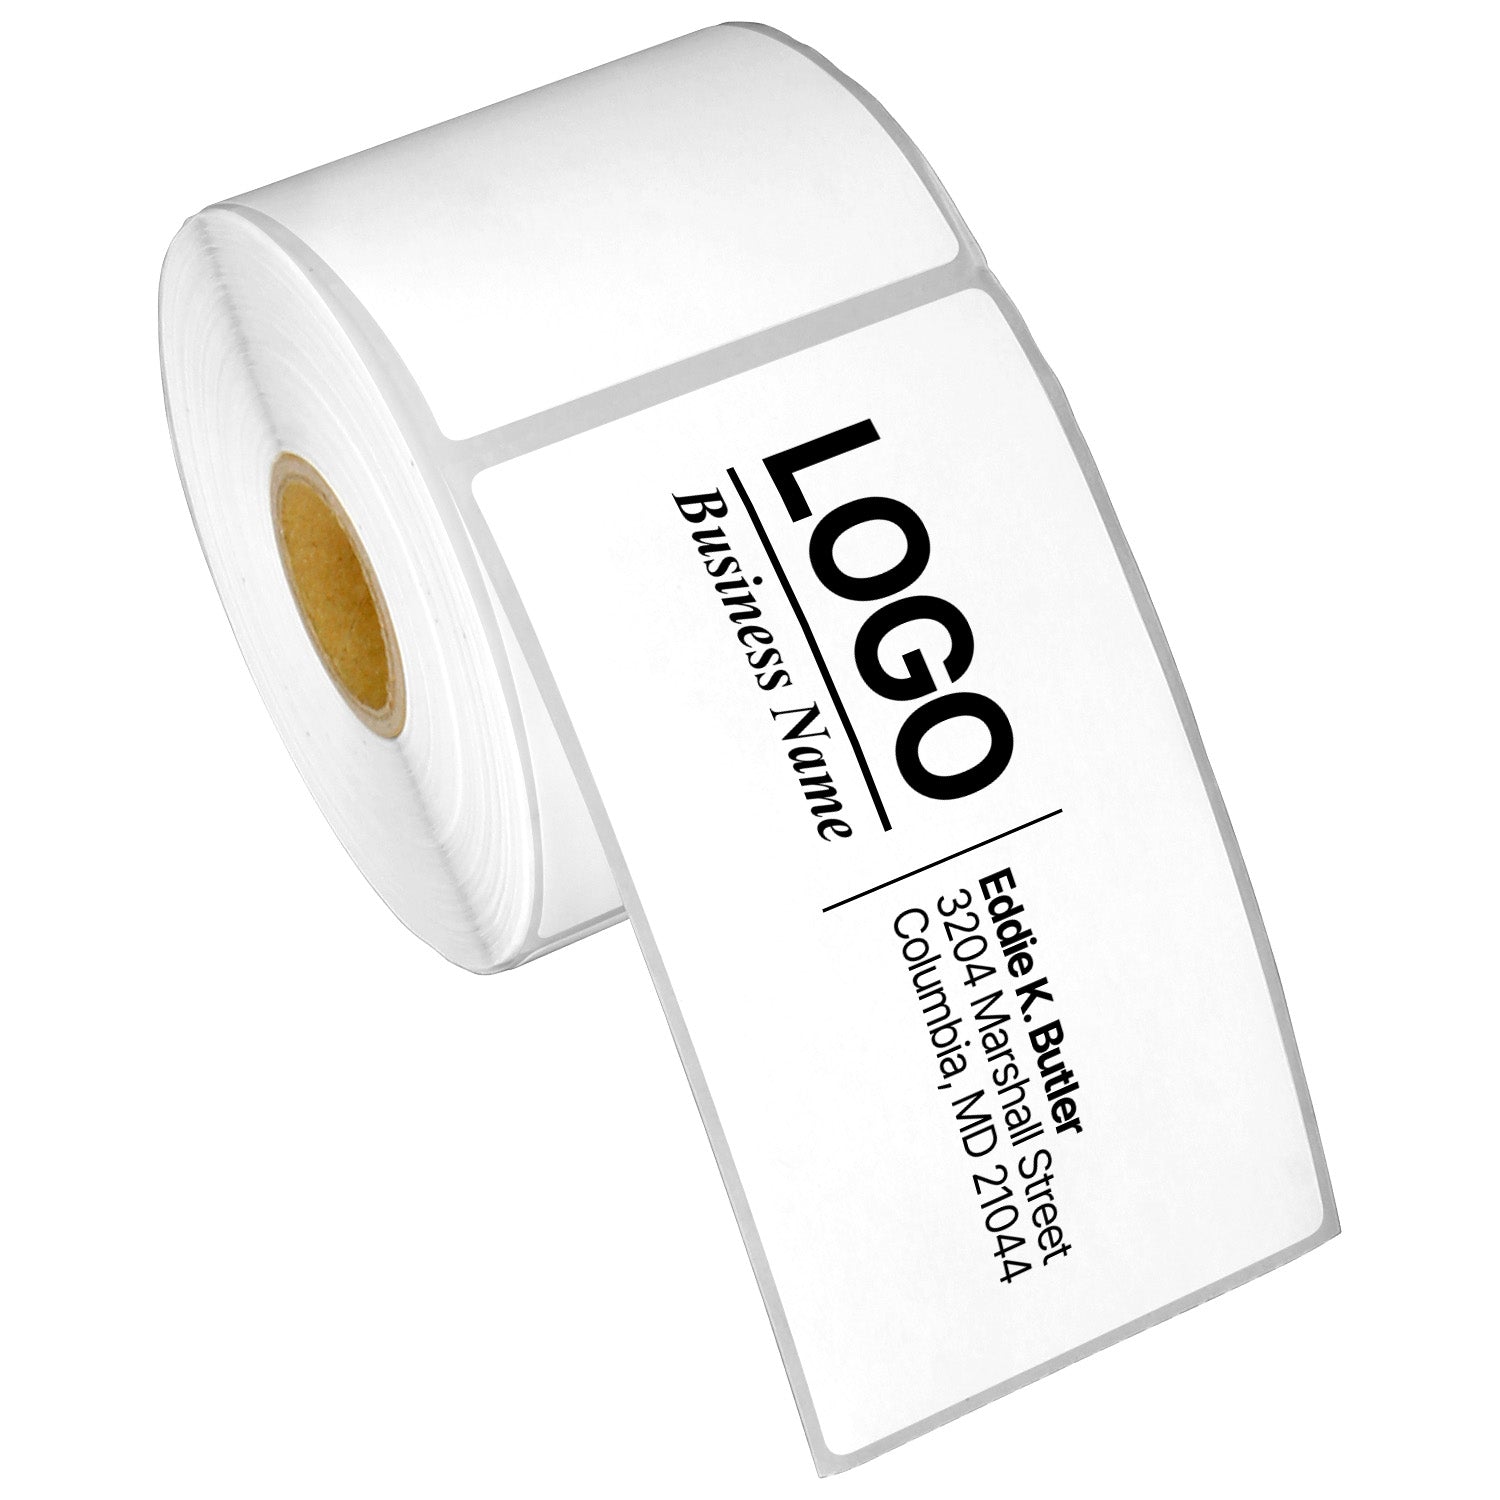 Dymo 30256 Compatible Labels - Discount Thermal Labels